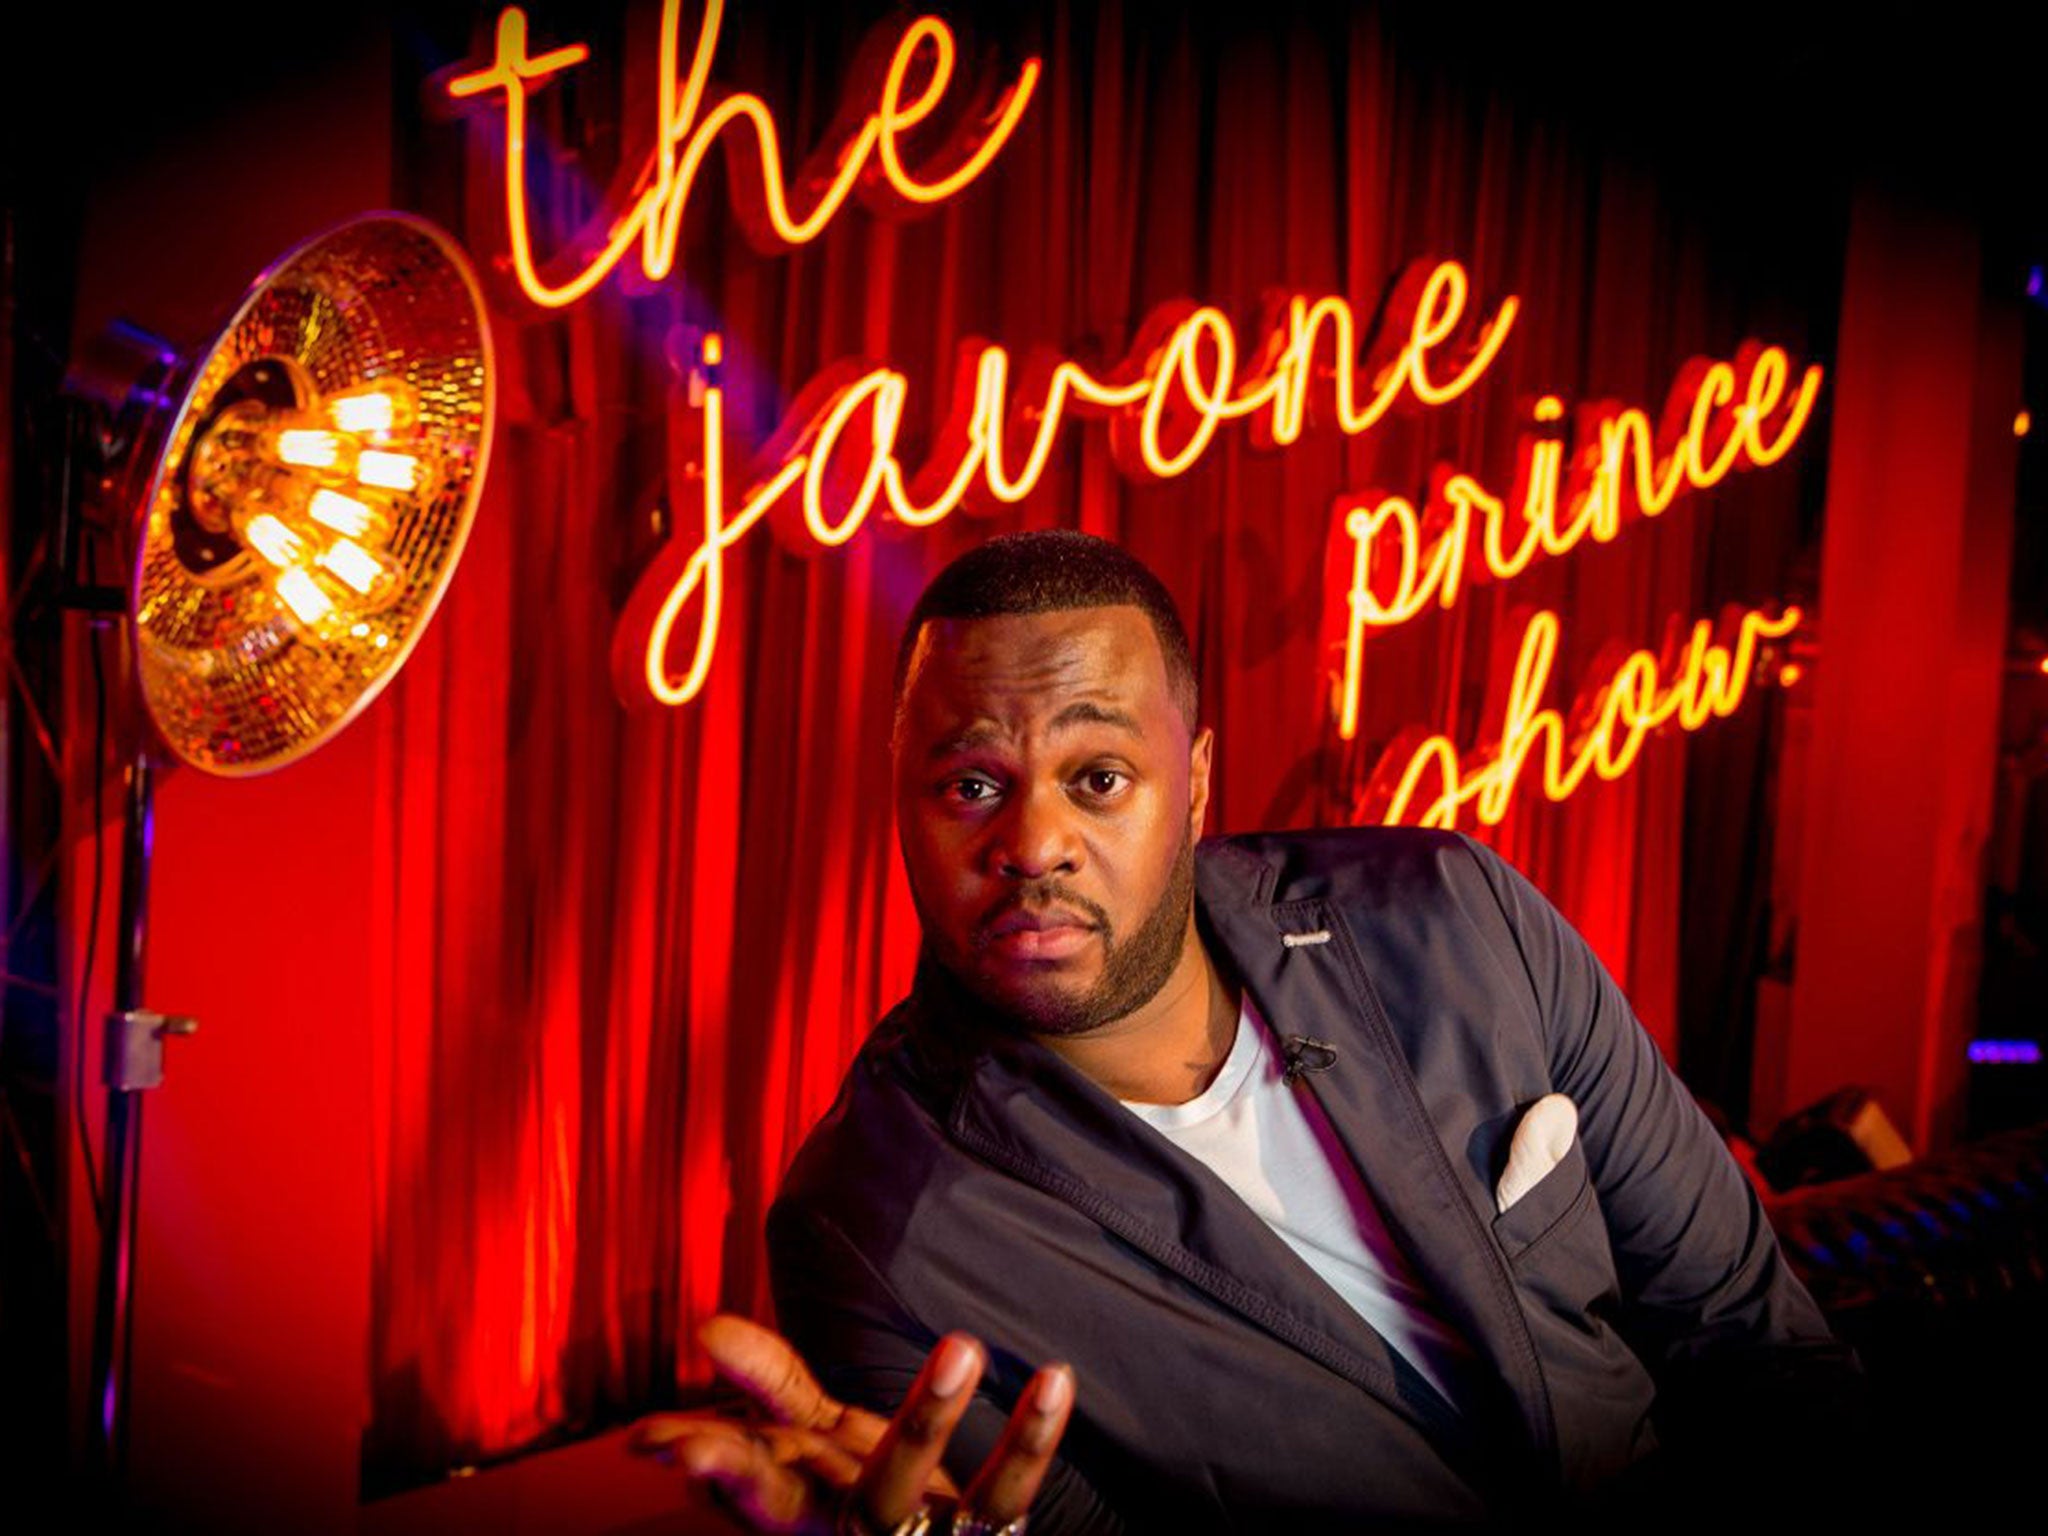 Promo shot for the Javone Prince Show